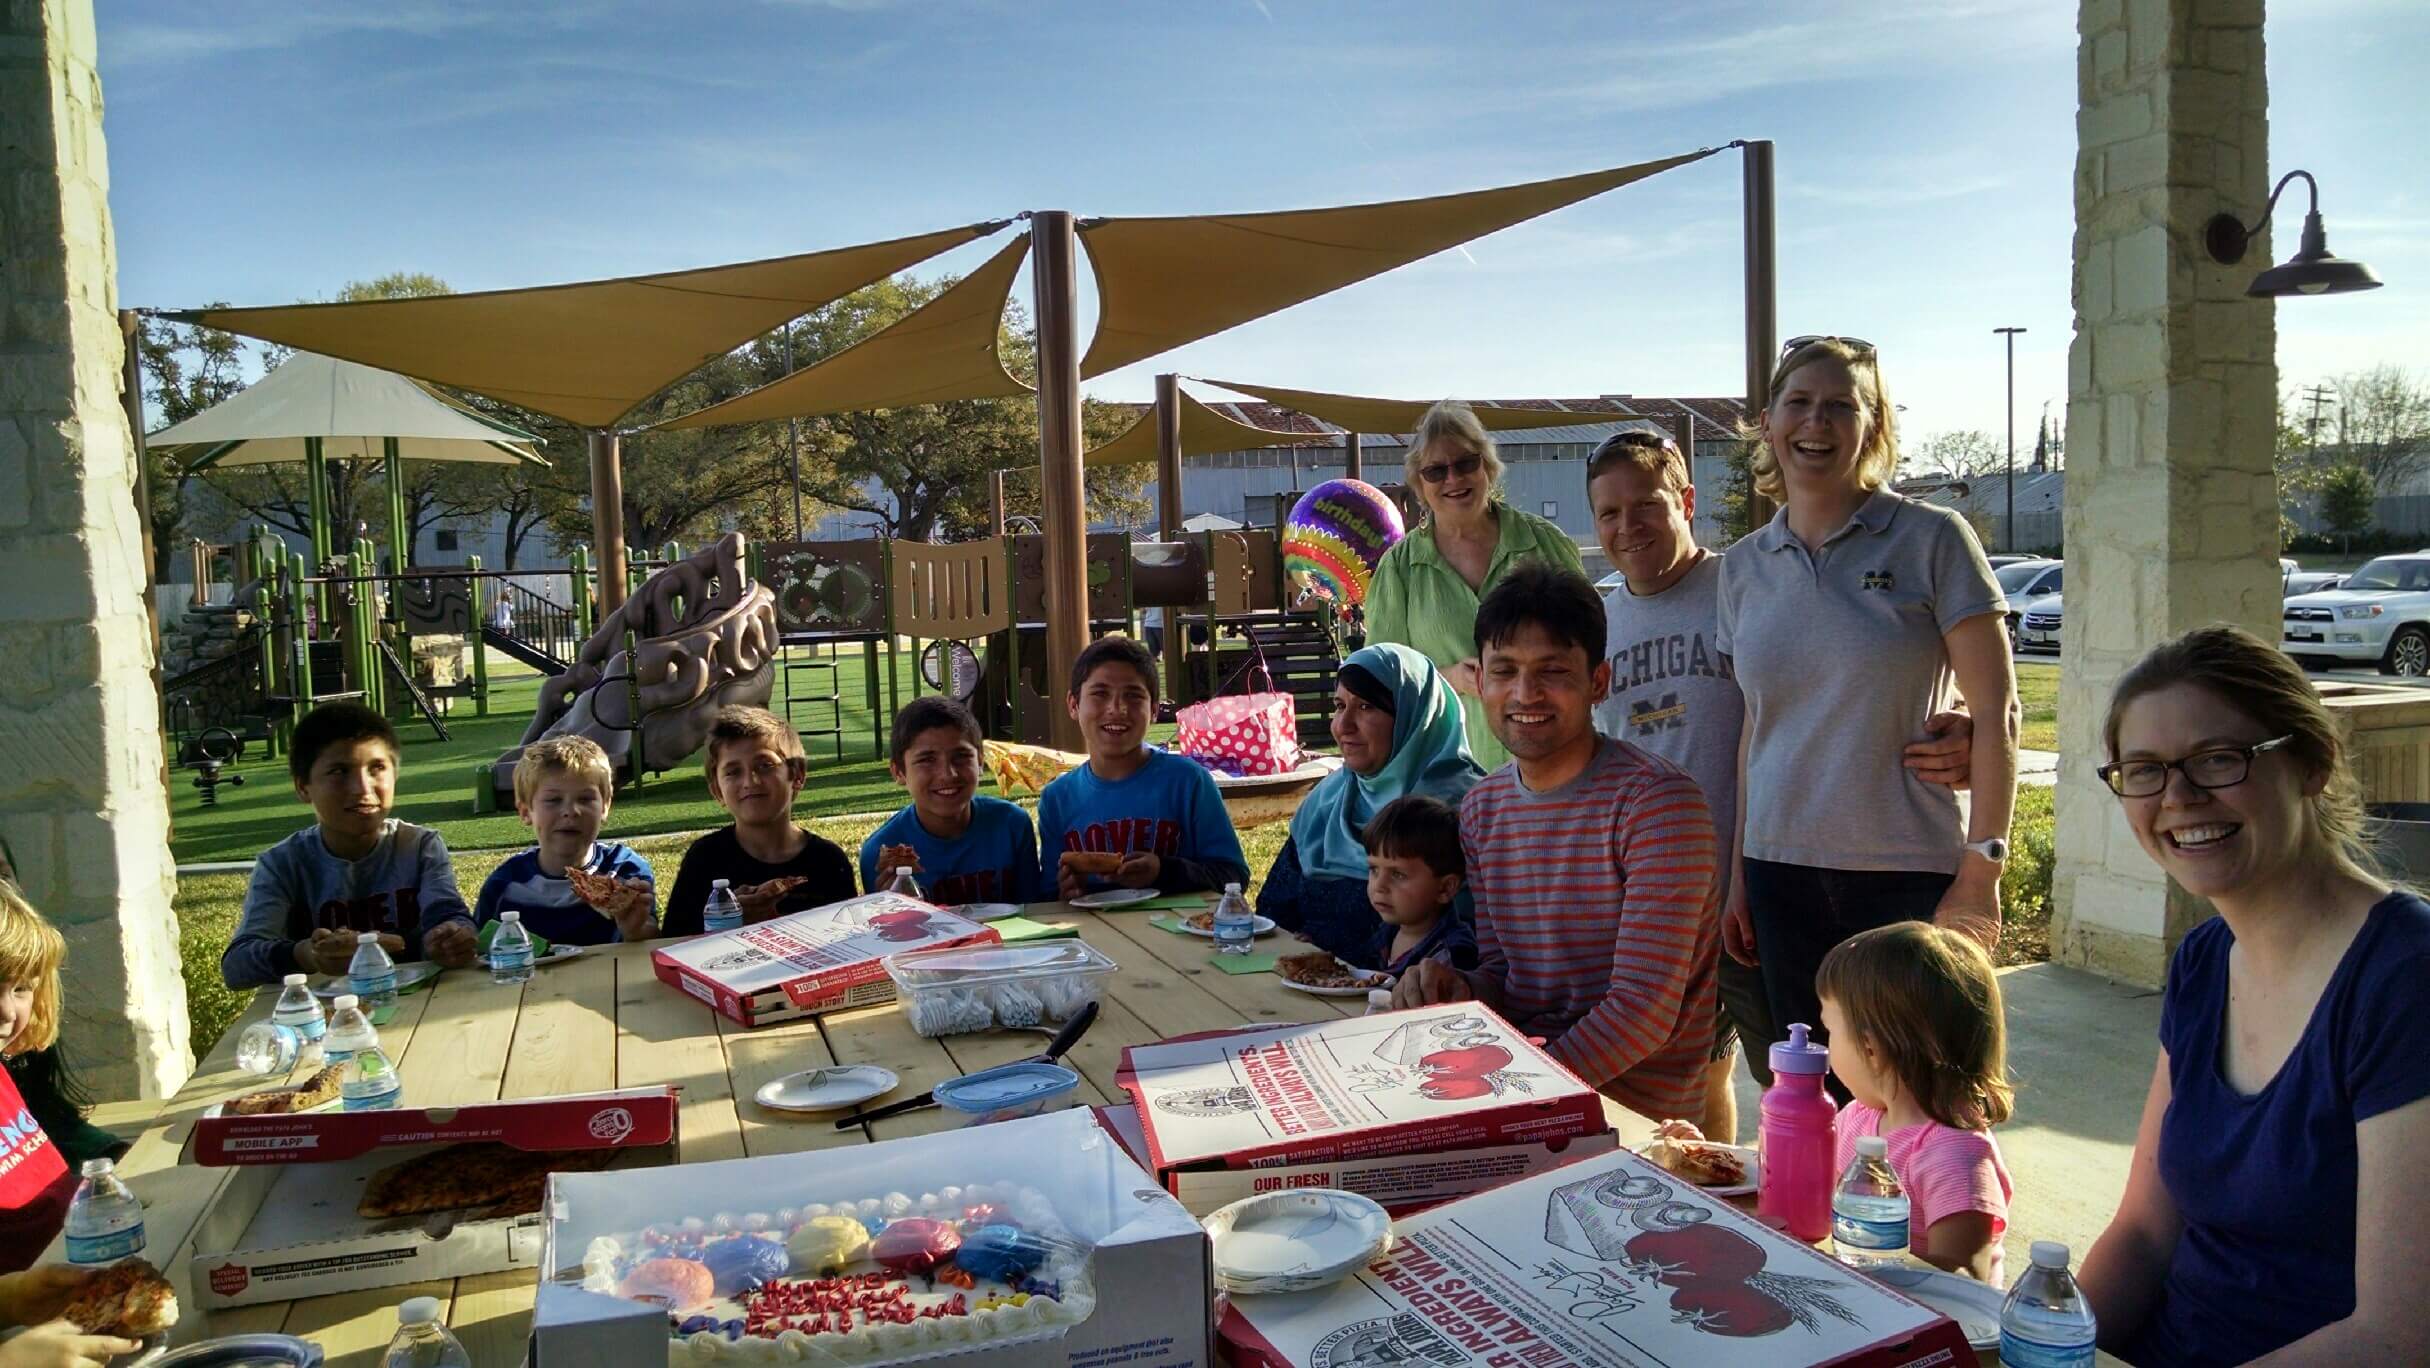 Since birthdays are not normally celebrated in Afghanistan, the Griffins threw an American-style birthday party for the Noor family's 13-year-old twin boys at a park playground, complete with pizza, cake and presents. 